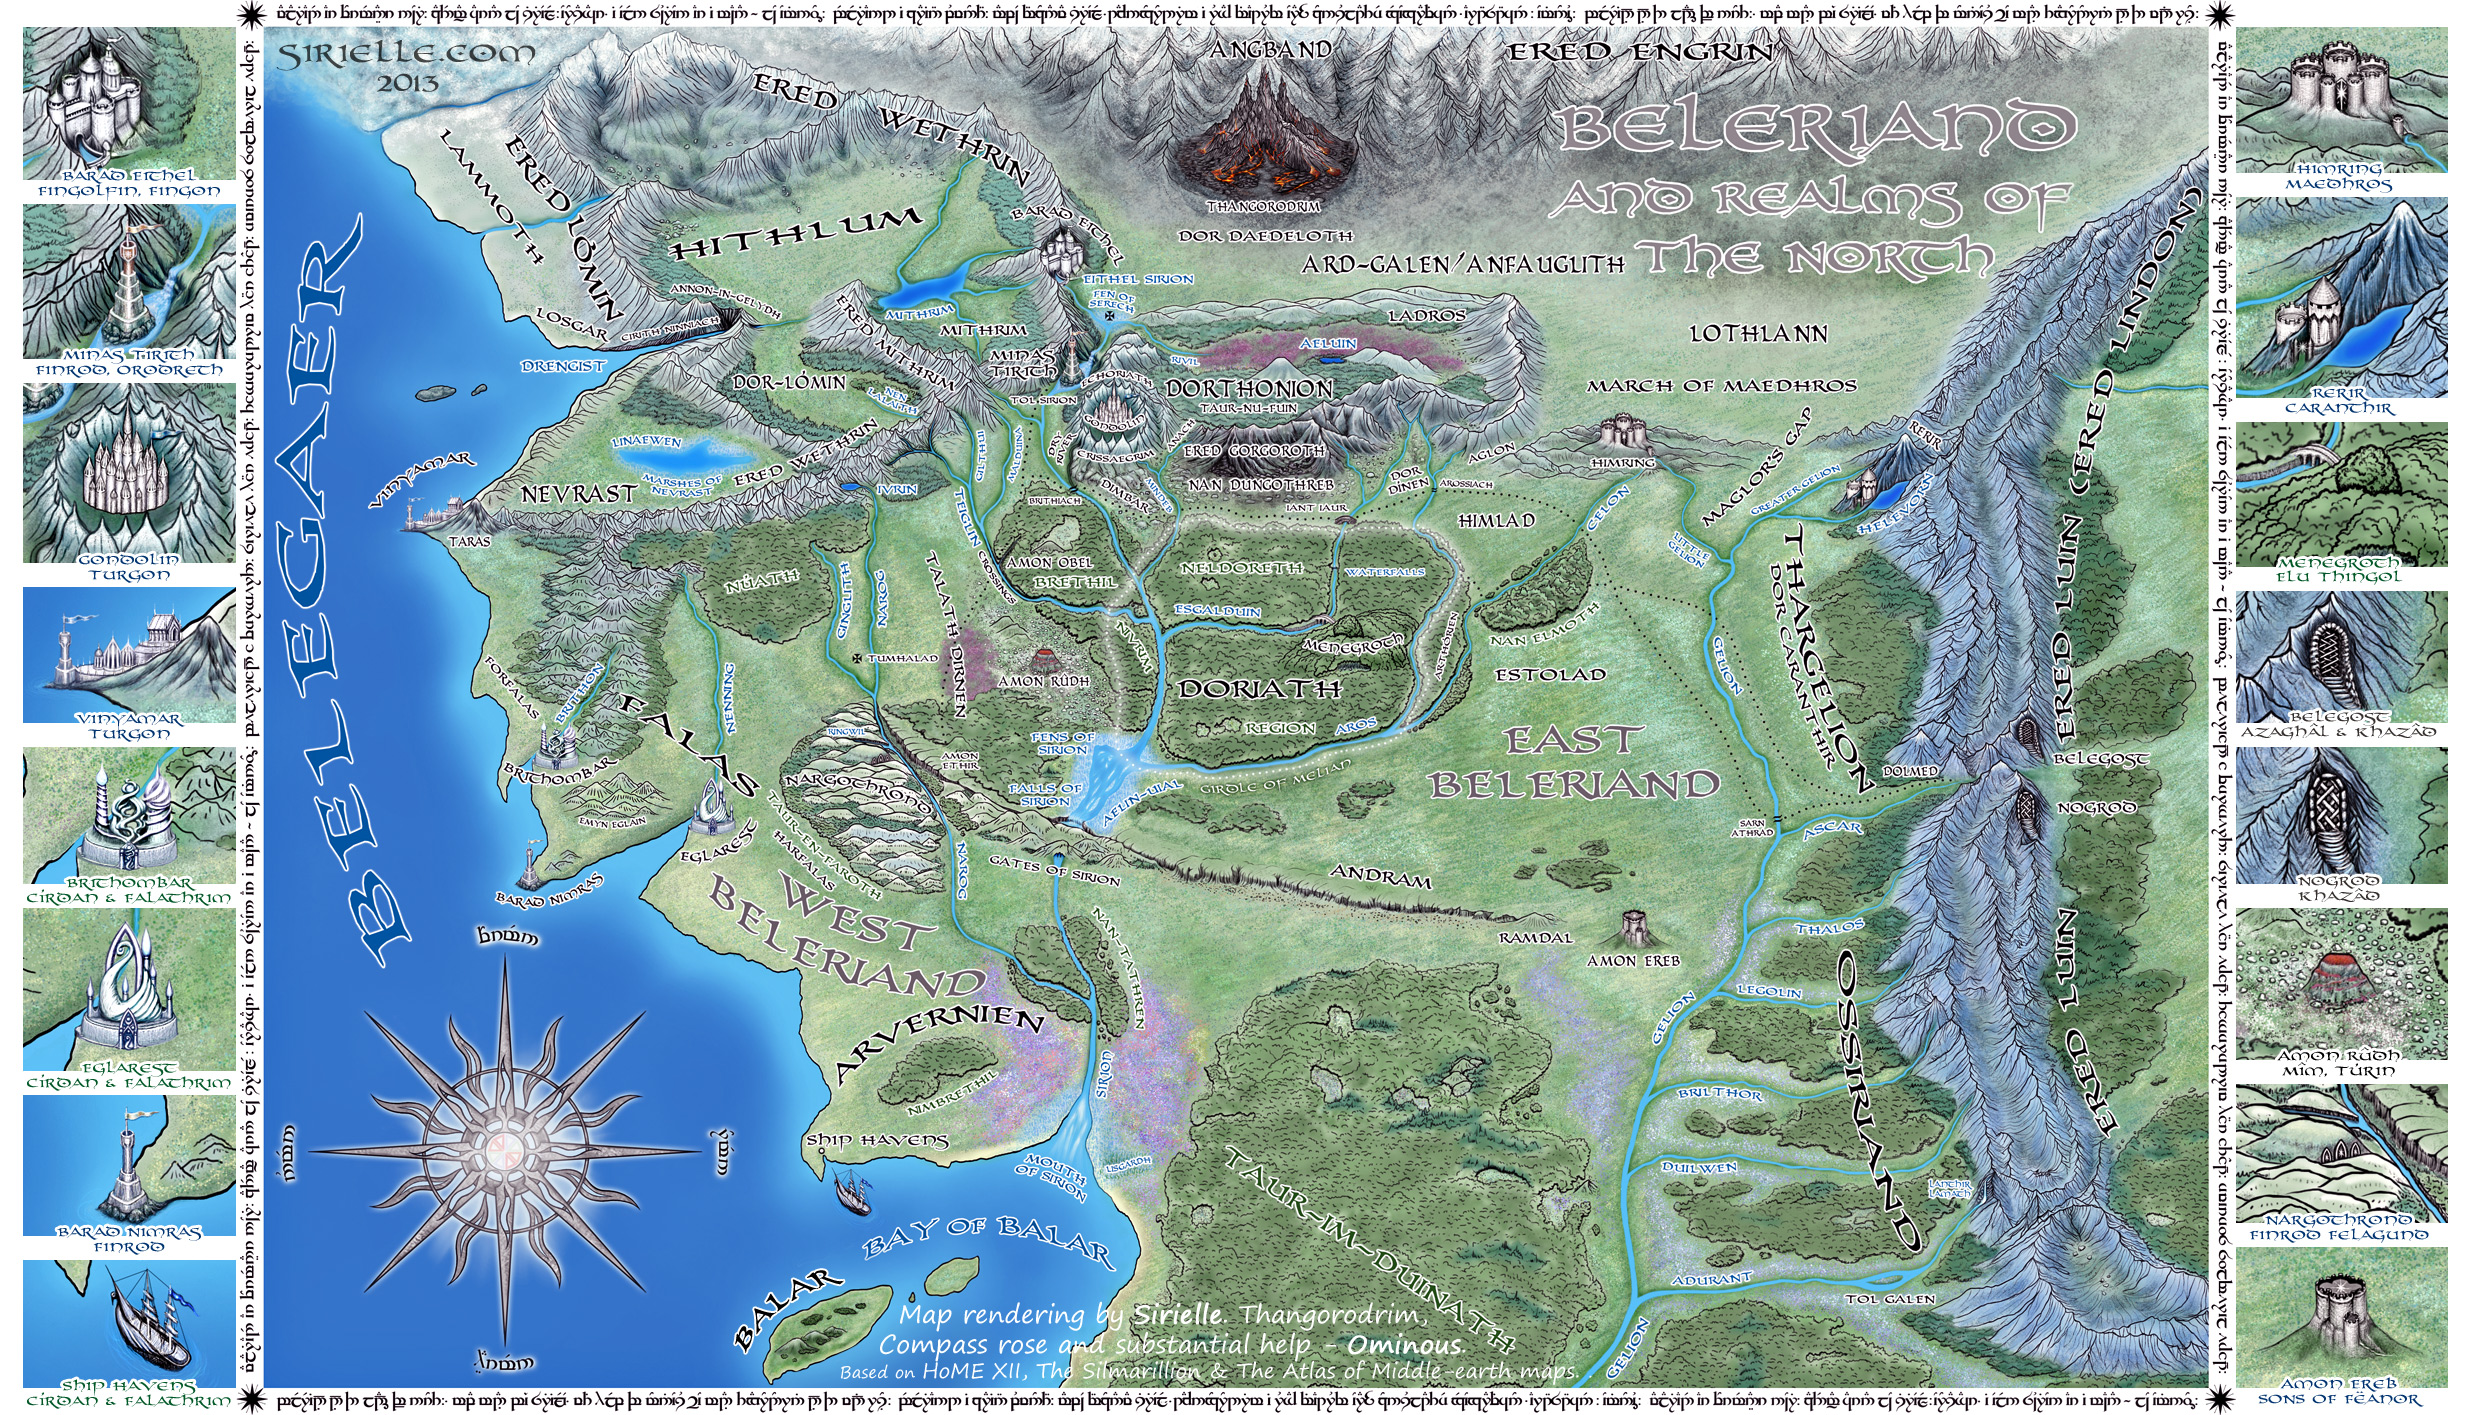 An awesome colour-rendering of the realms of Beleriand from The